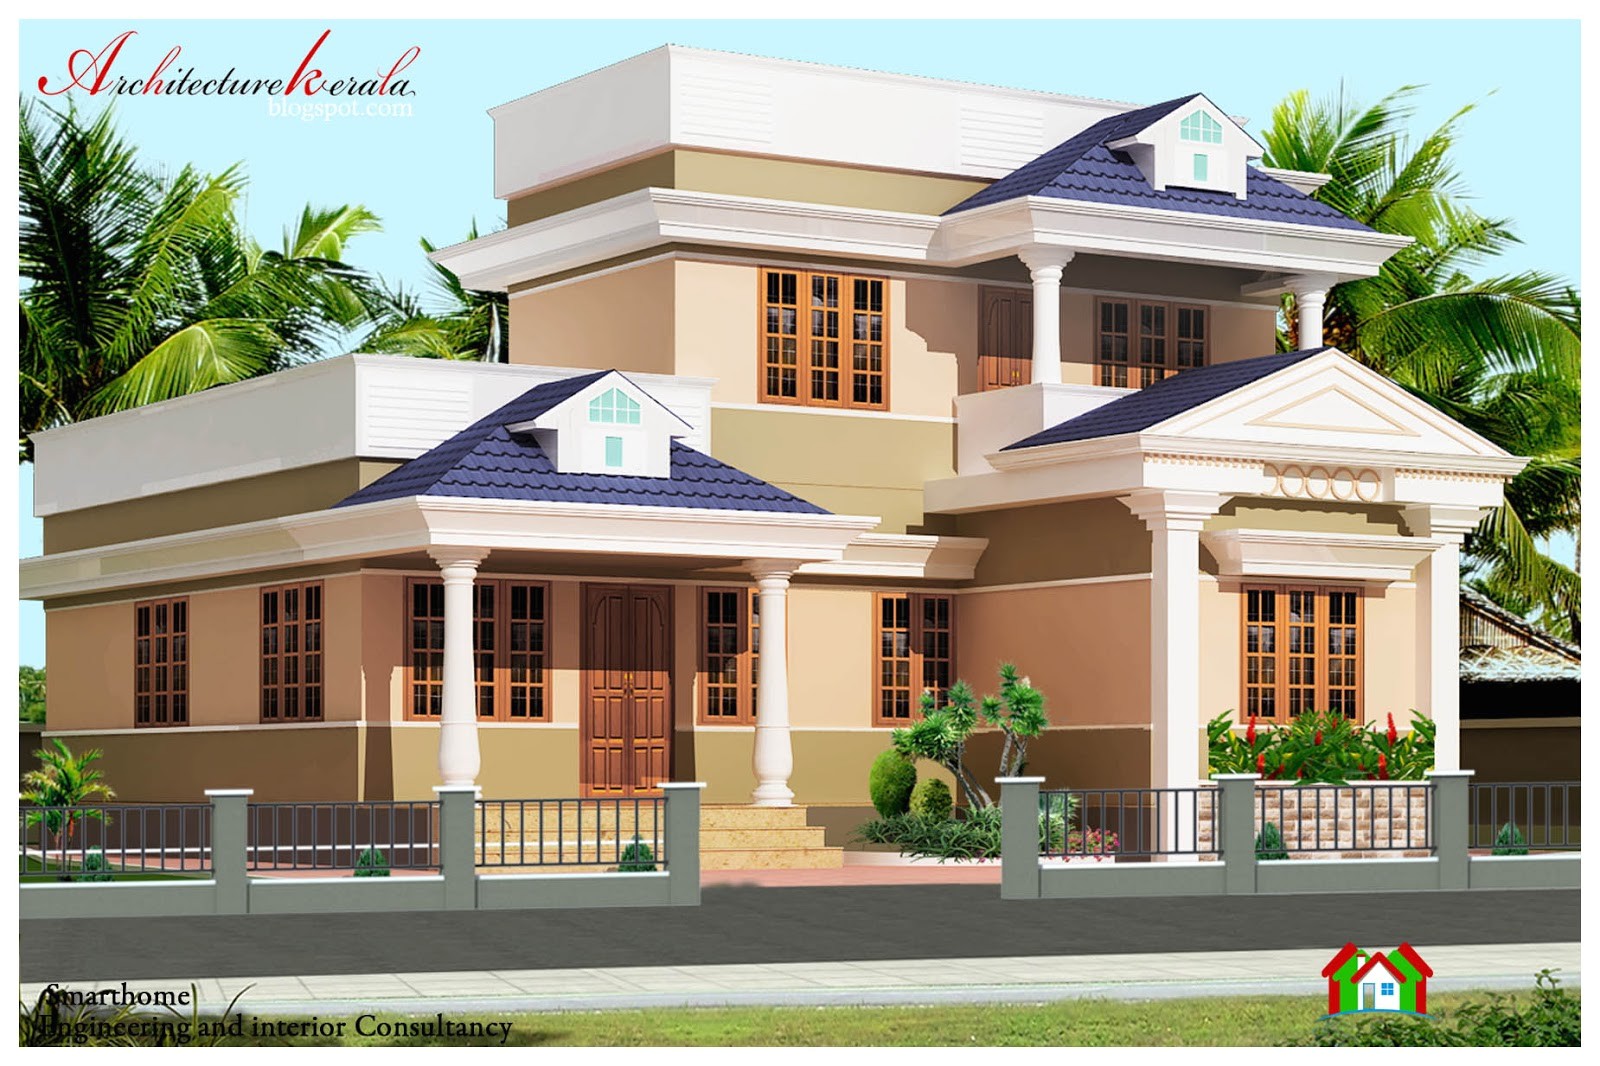 new kerala style home designs